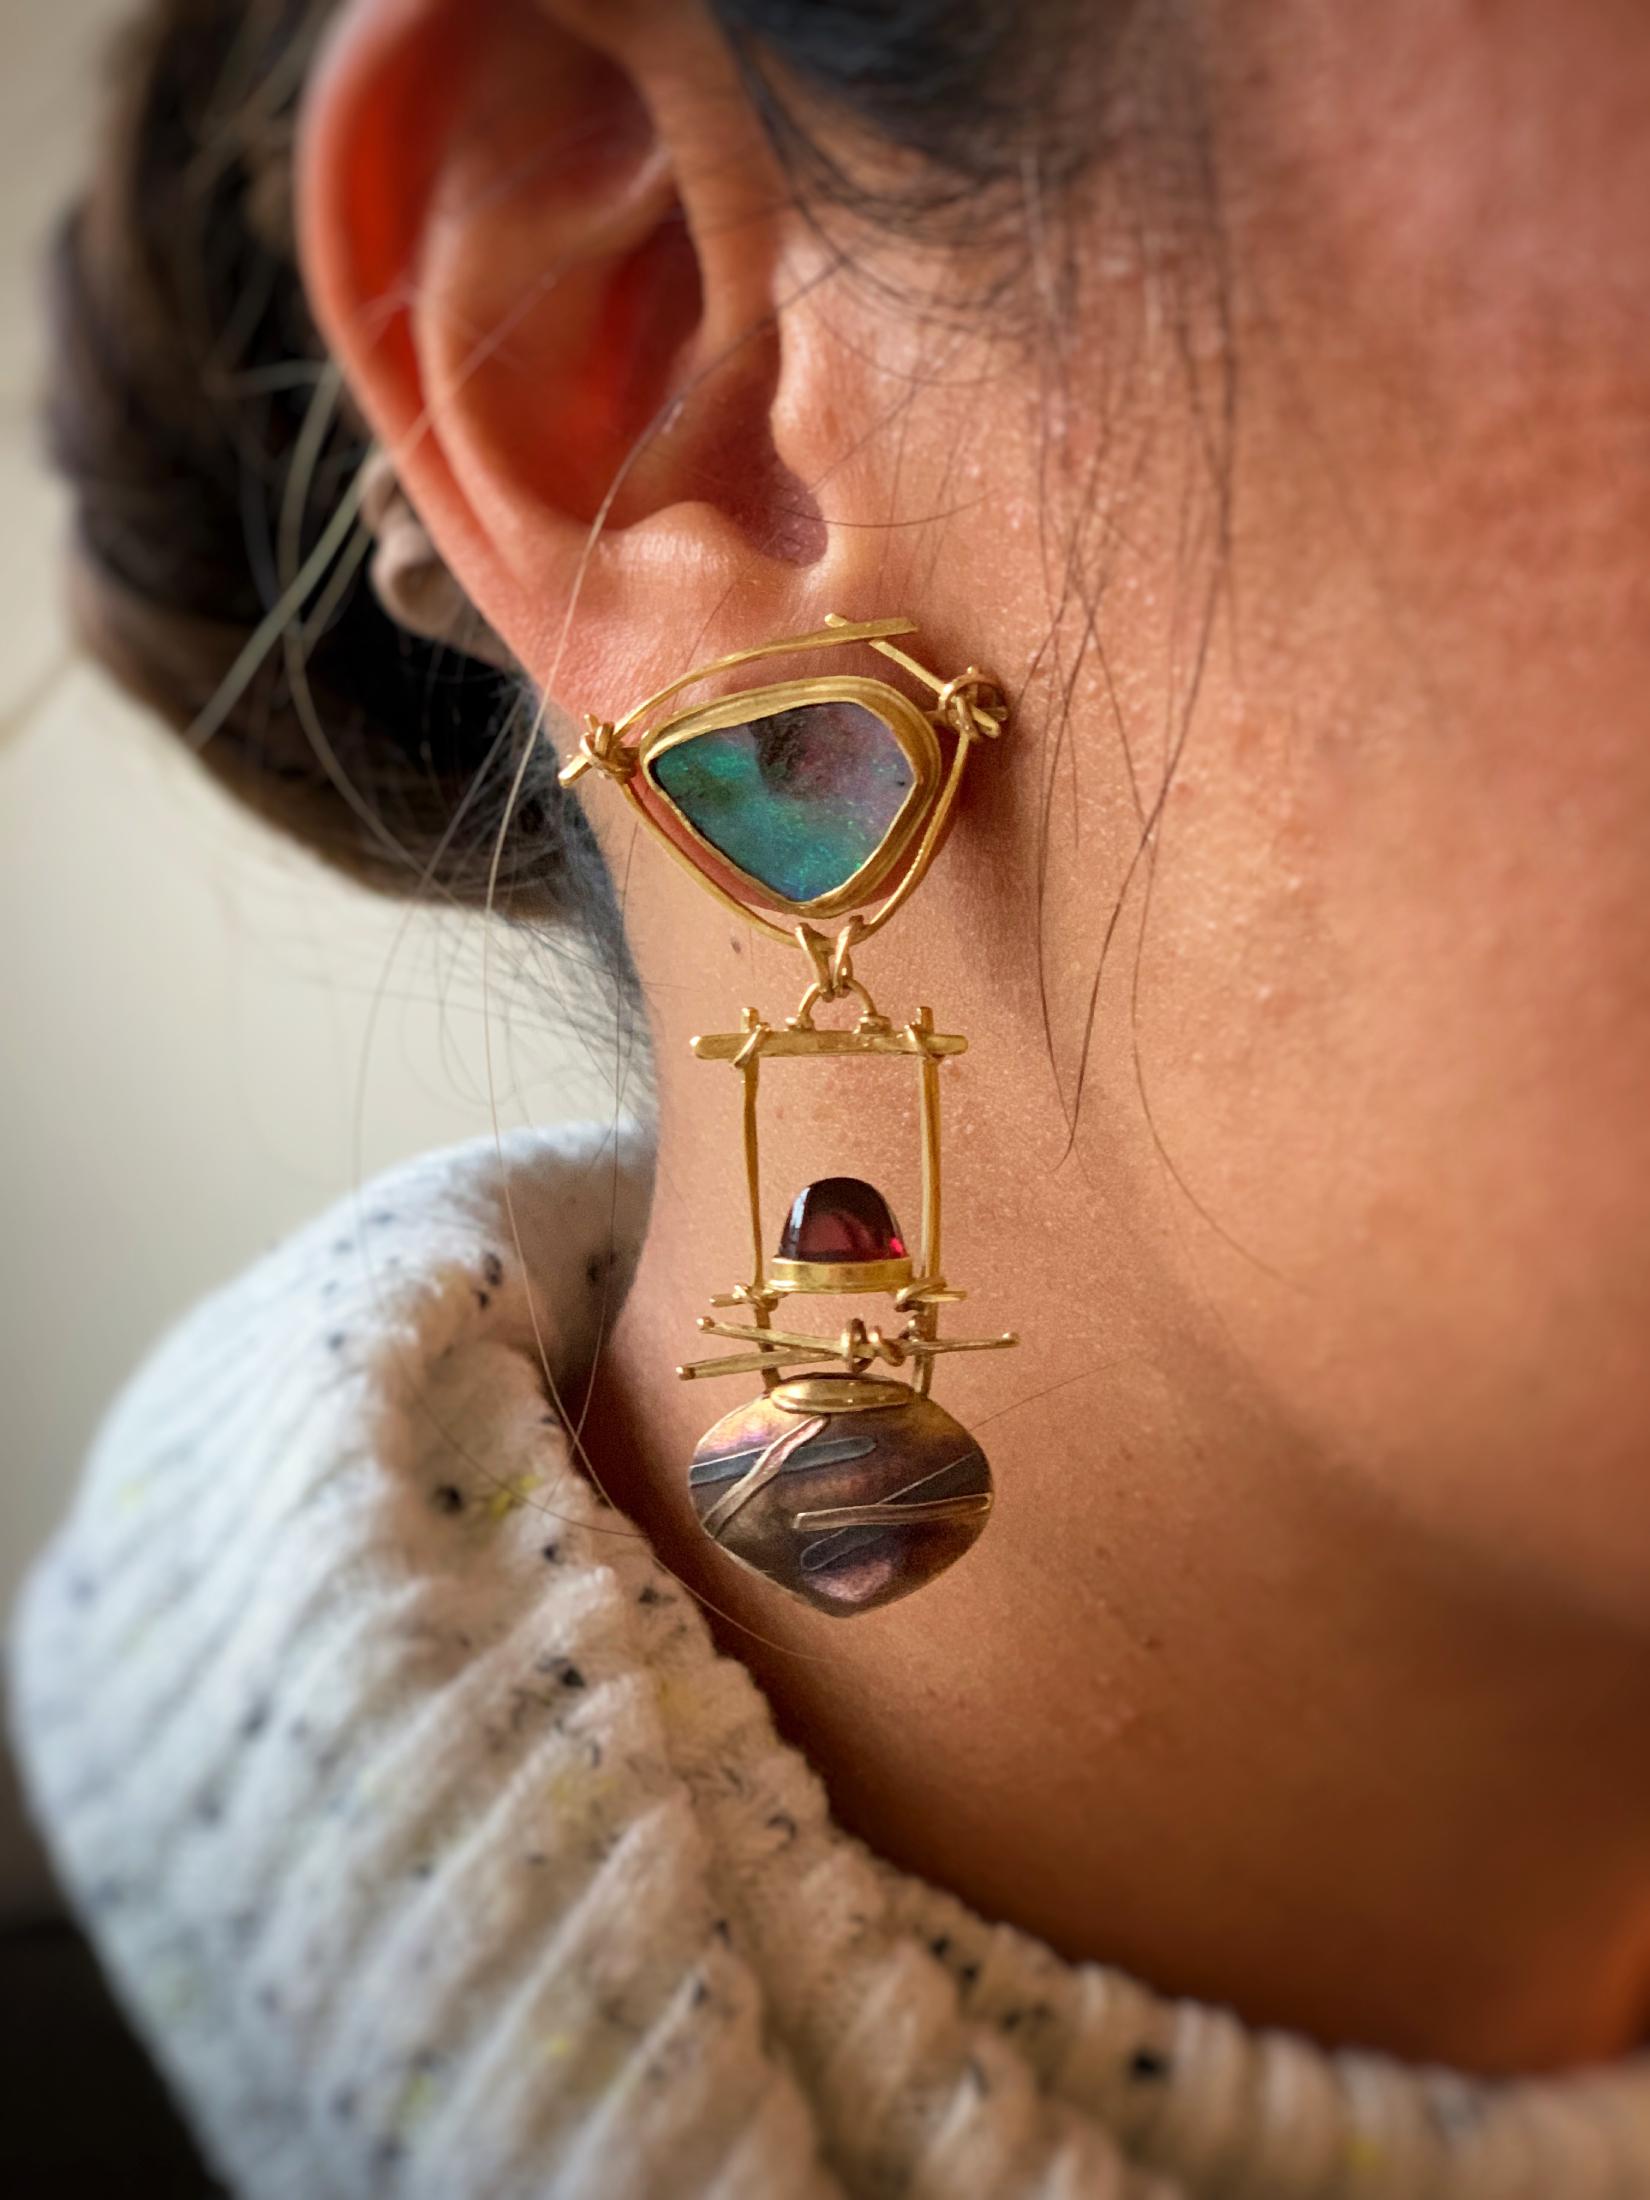 Original, hand made earrings by Designer Carolyn Morris Bach.  Beautiful Freeform Boulder Opals approx 11mm x 11mm are bezel set in Carolyn's trademark gold work.  Polished Half Moon Garnets are bezel set in the drop part of the earrings.  Post